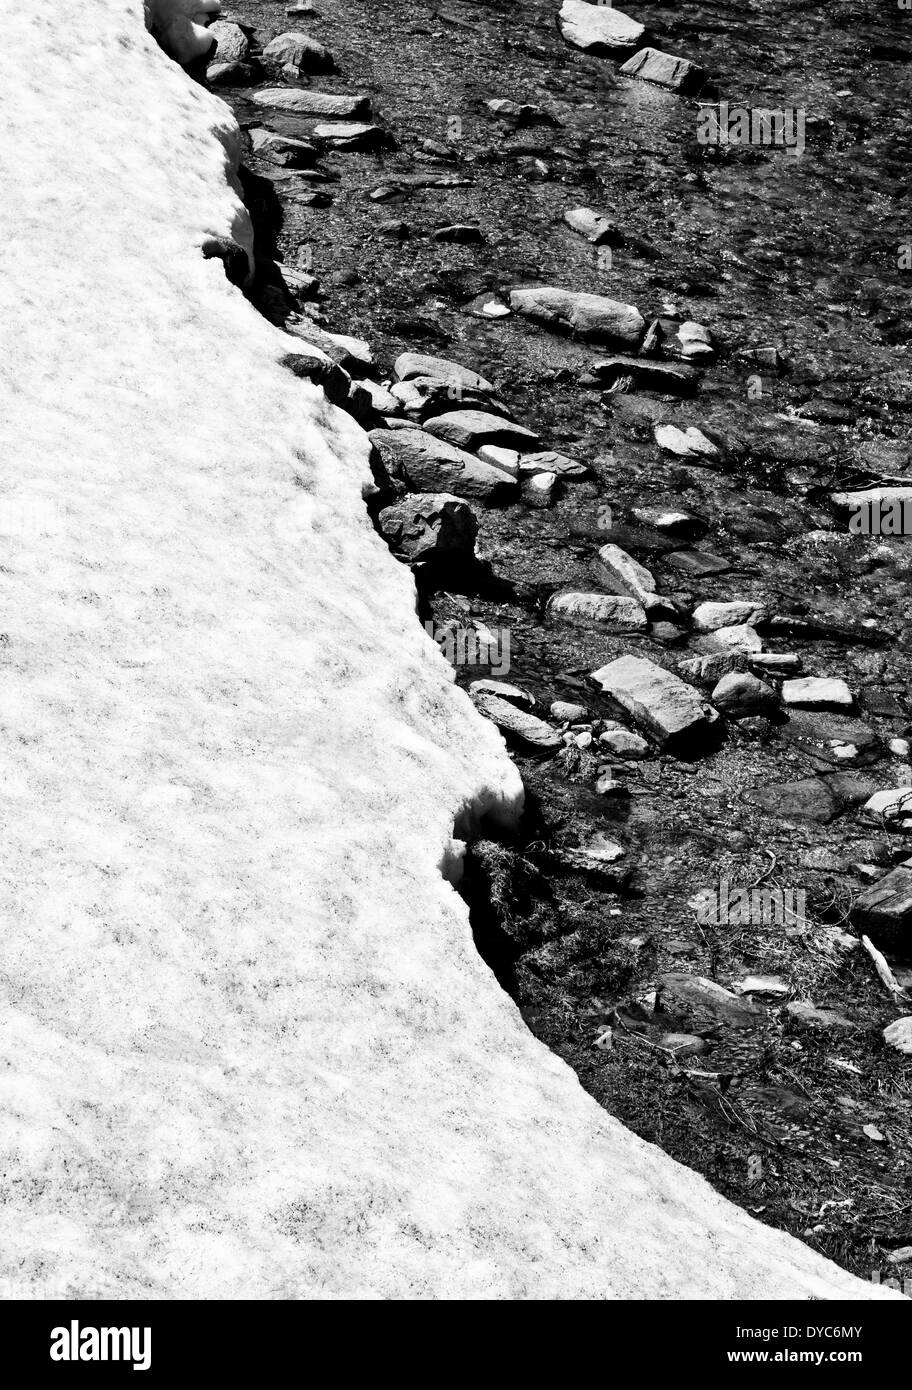 Snow covered river edge, black and white Stock Photo